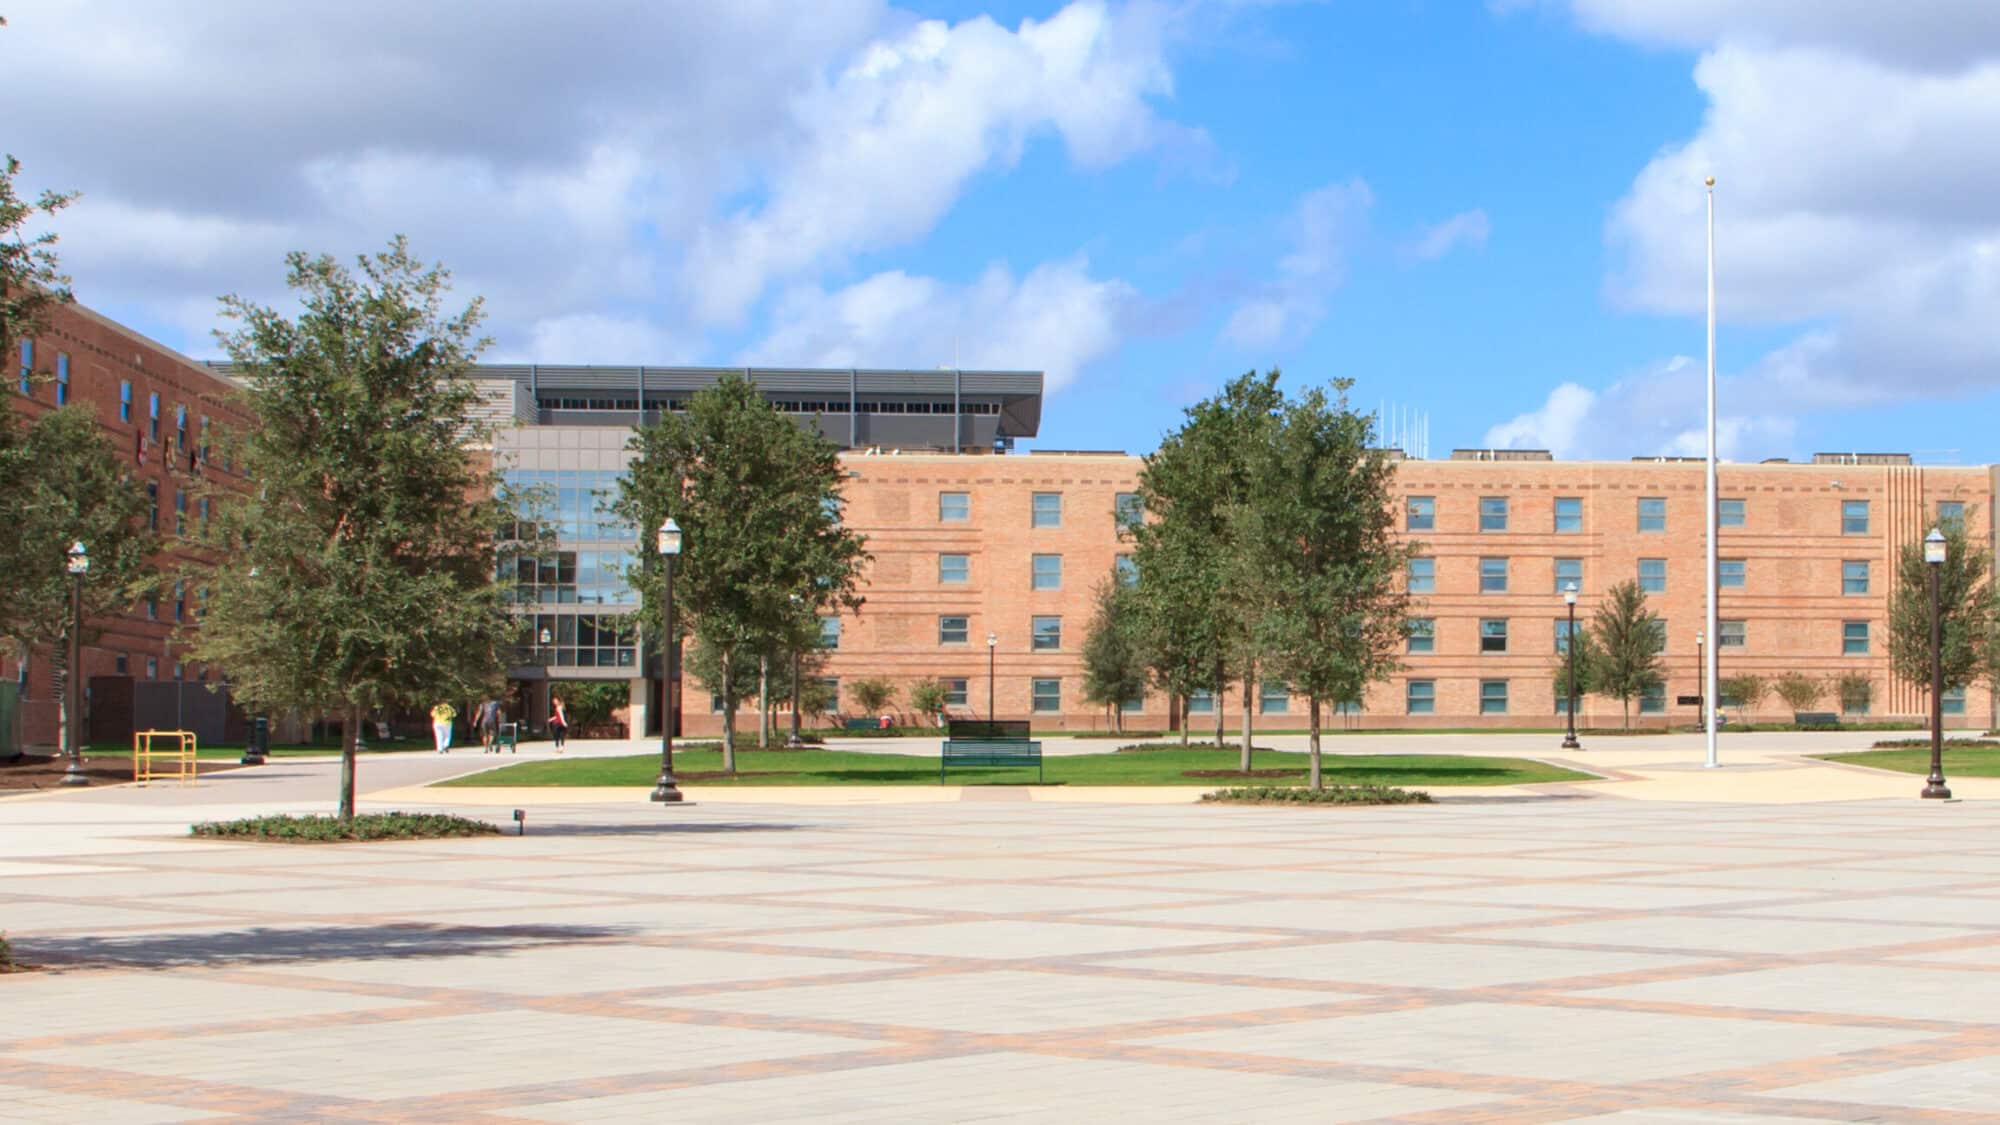 Campus plaza with brick buildings and trees.